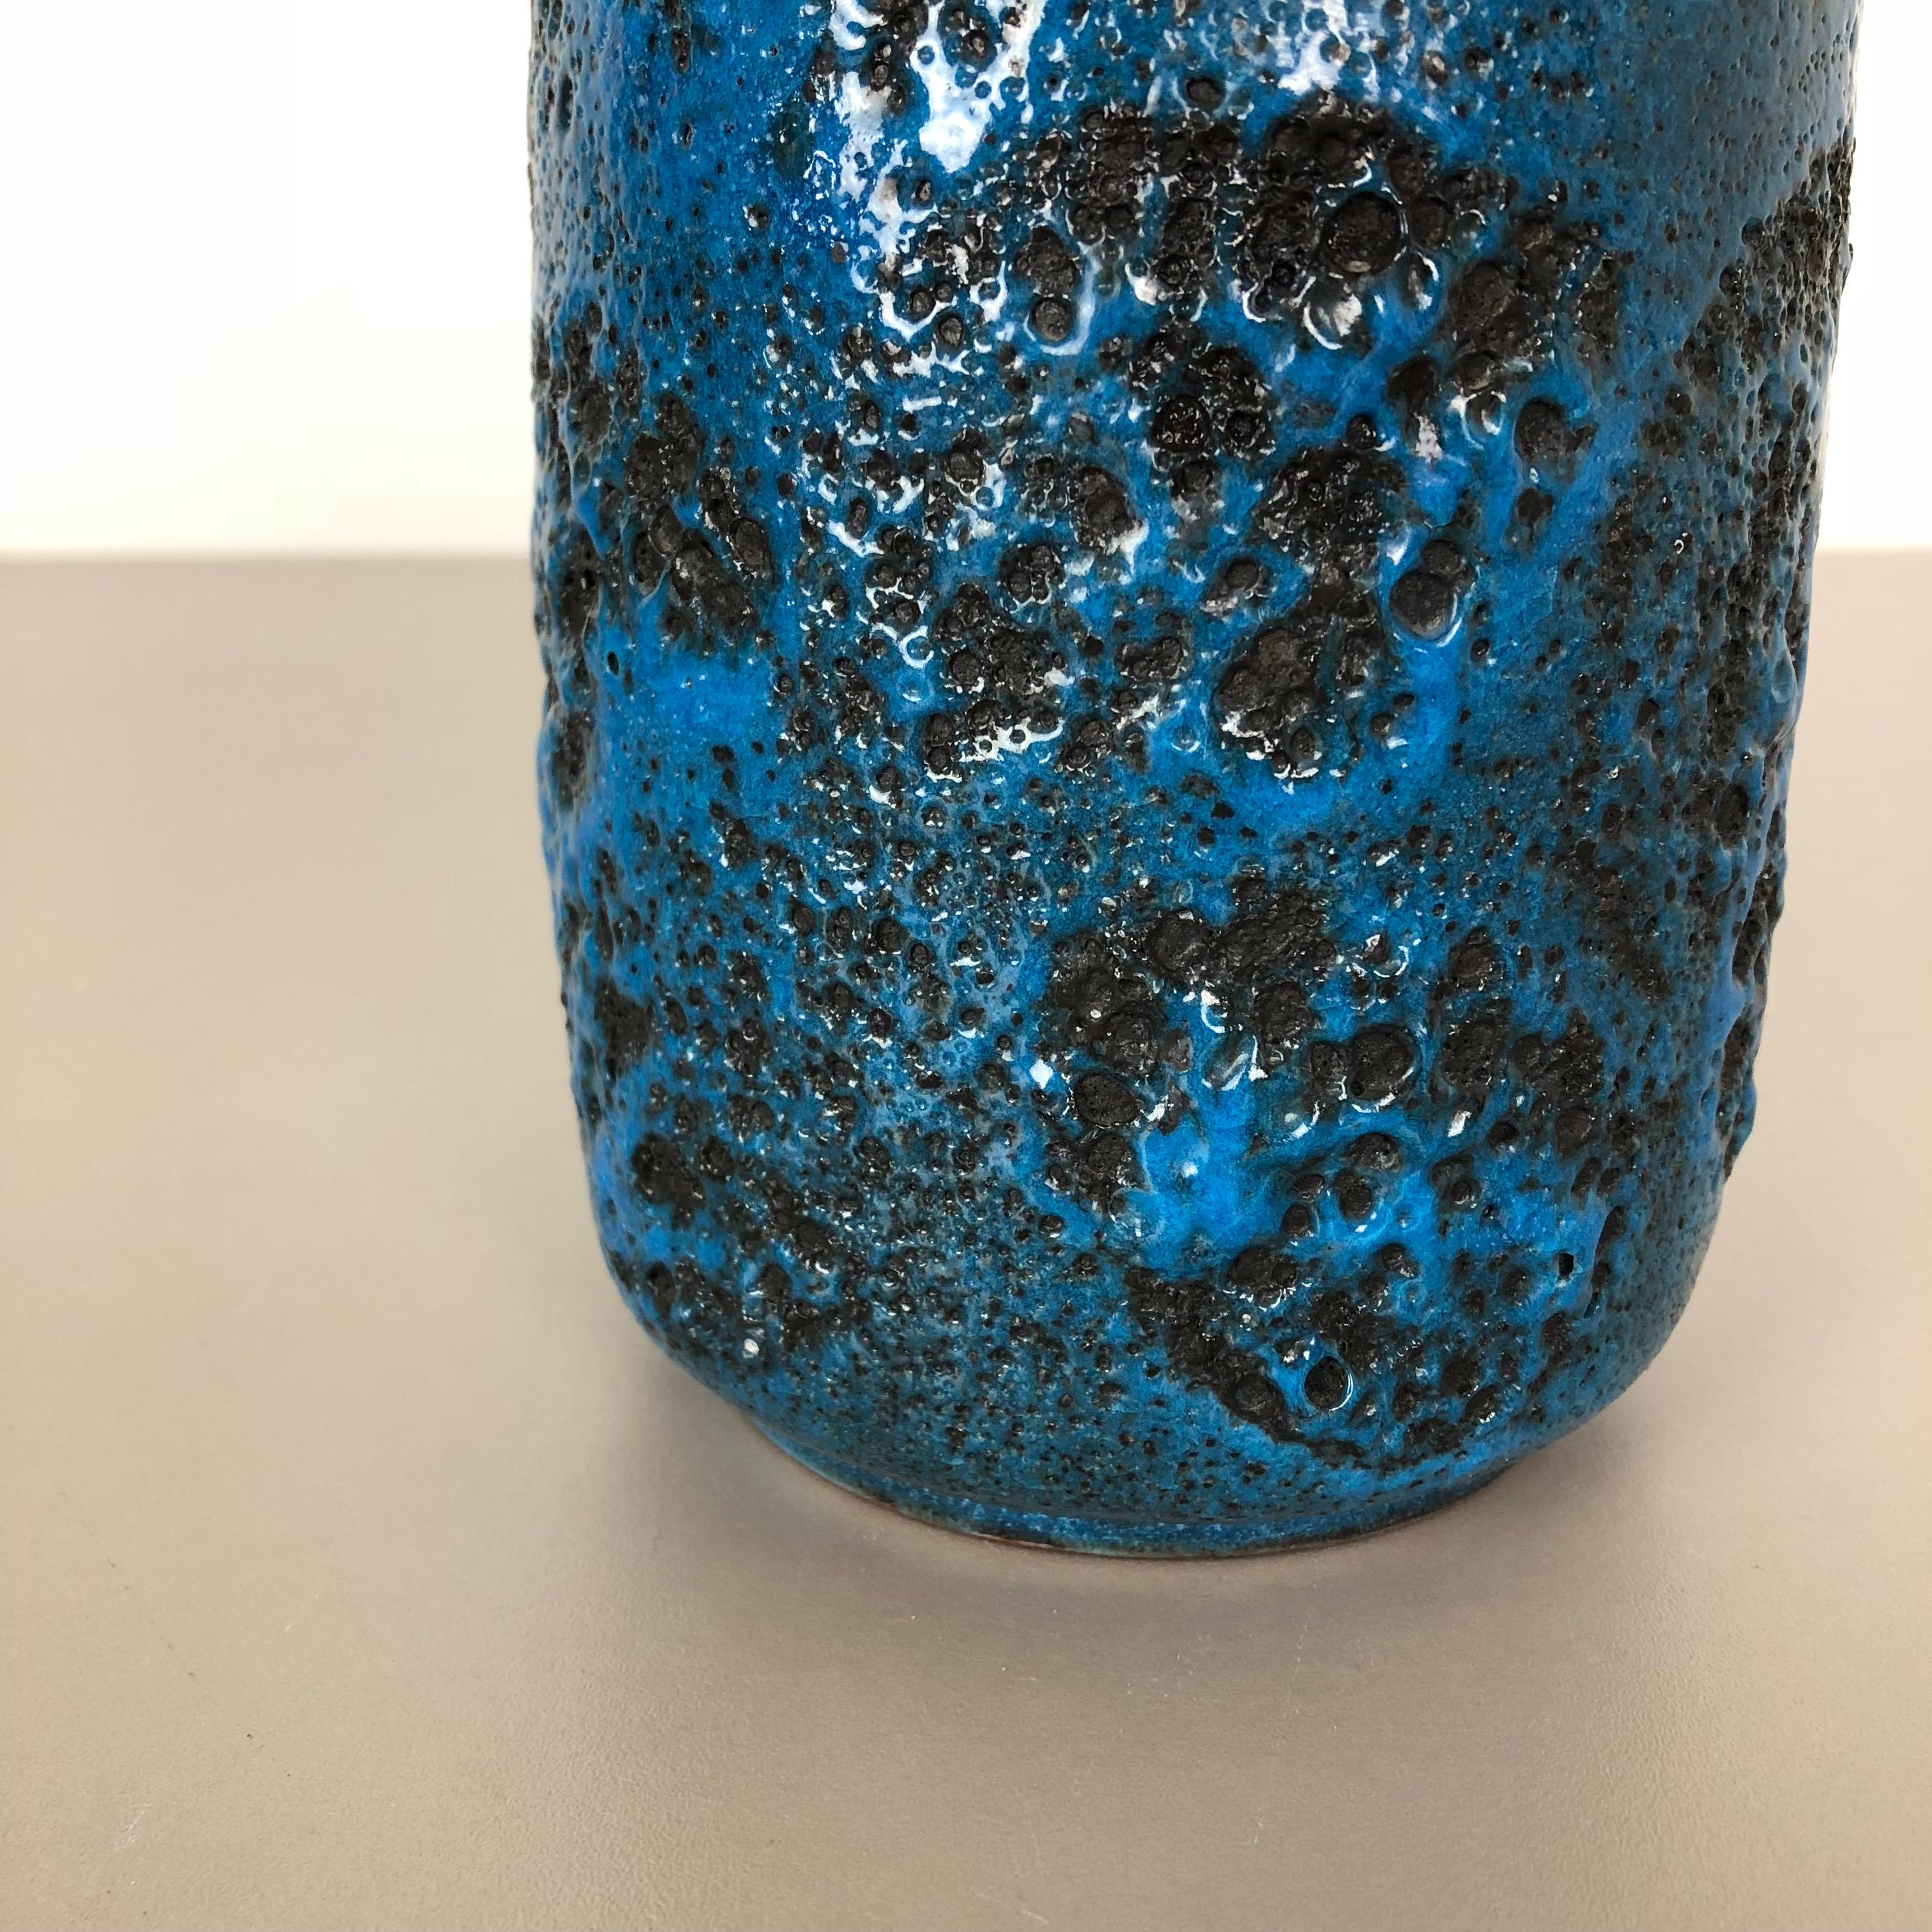 Super Colorful Fat Lava Pottery Vase by Gräflich Ortenburg, Germany, 1950s For Sale 5